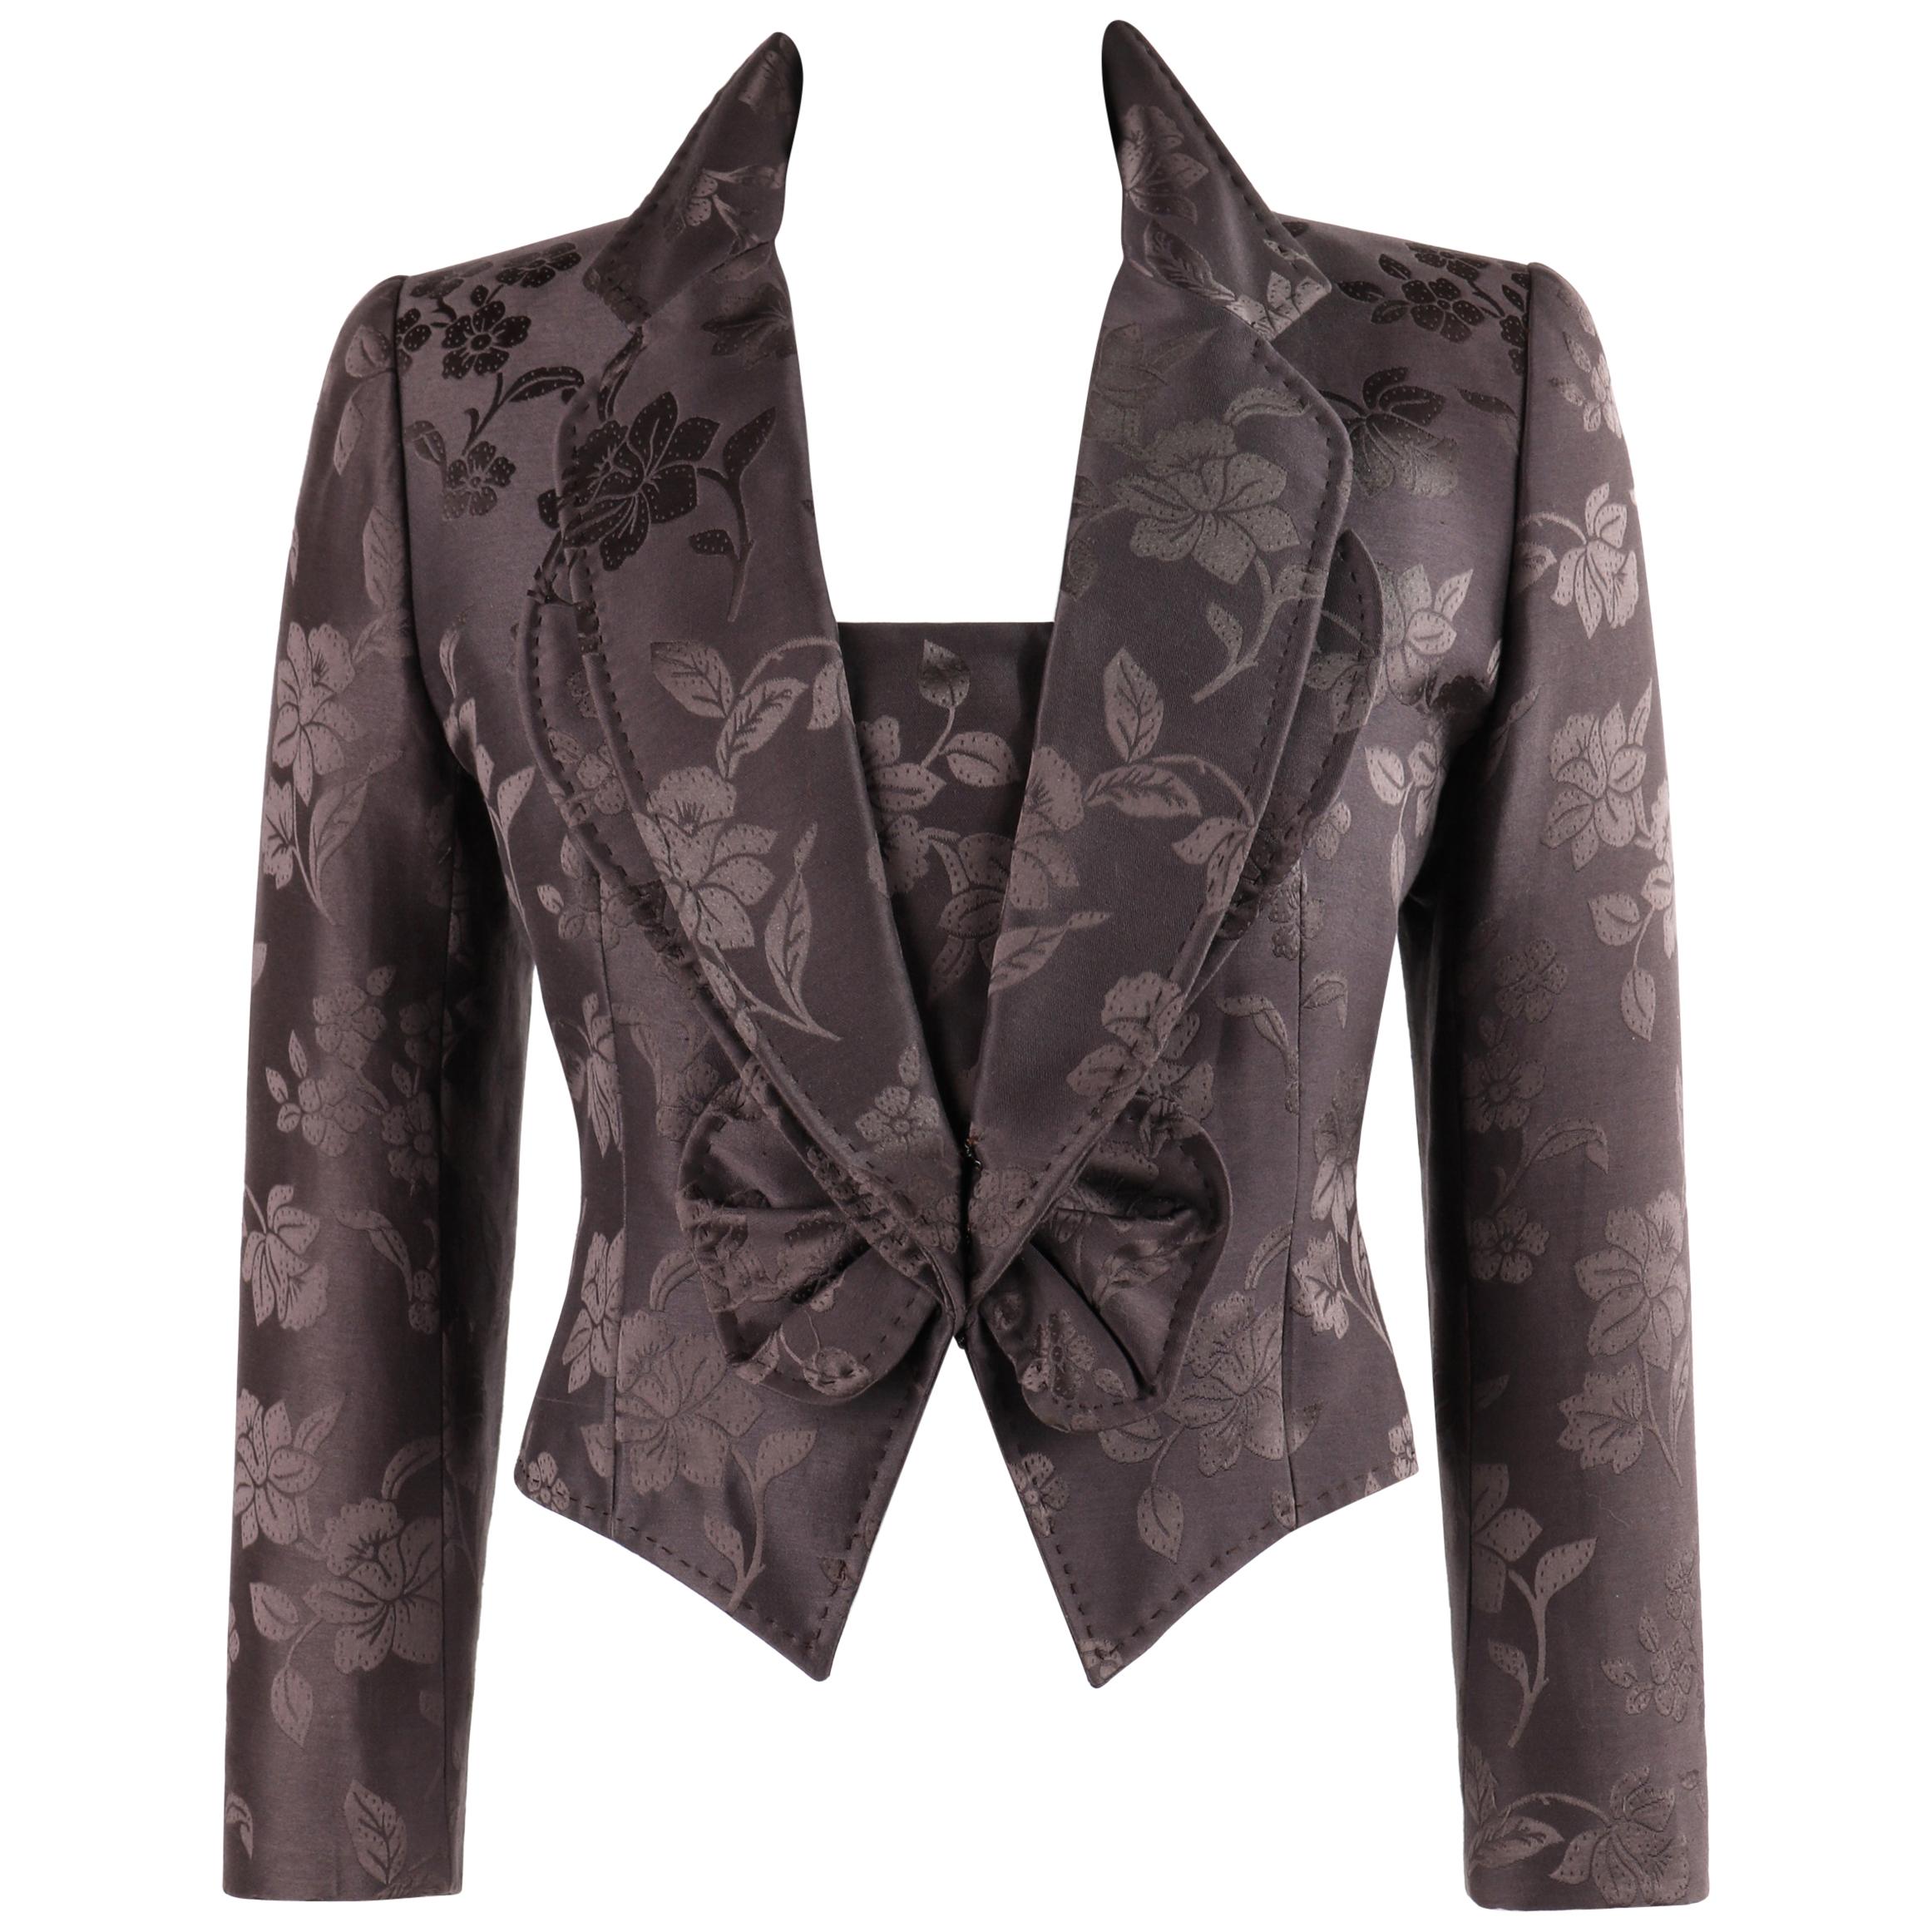 GIVENCHY COUTURE A/W 1997 ALEXANDER McQUEEN Purple Floral Jacquard Blazer Jacket